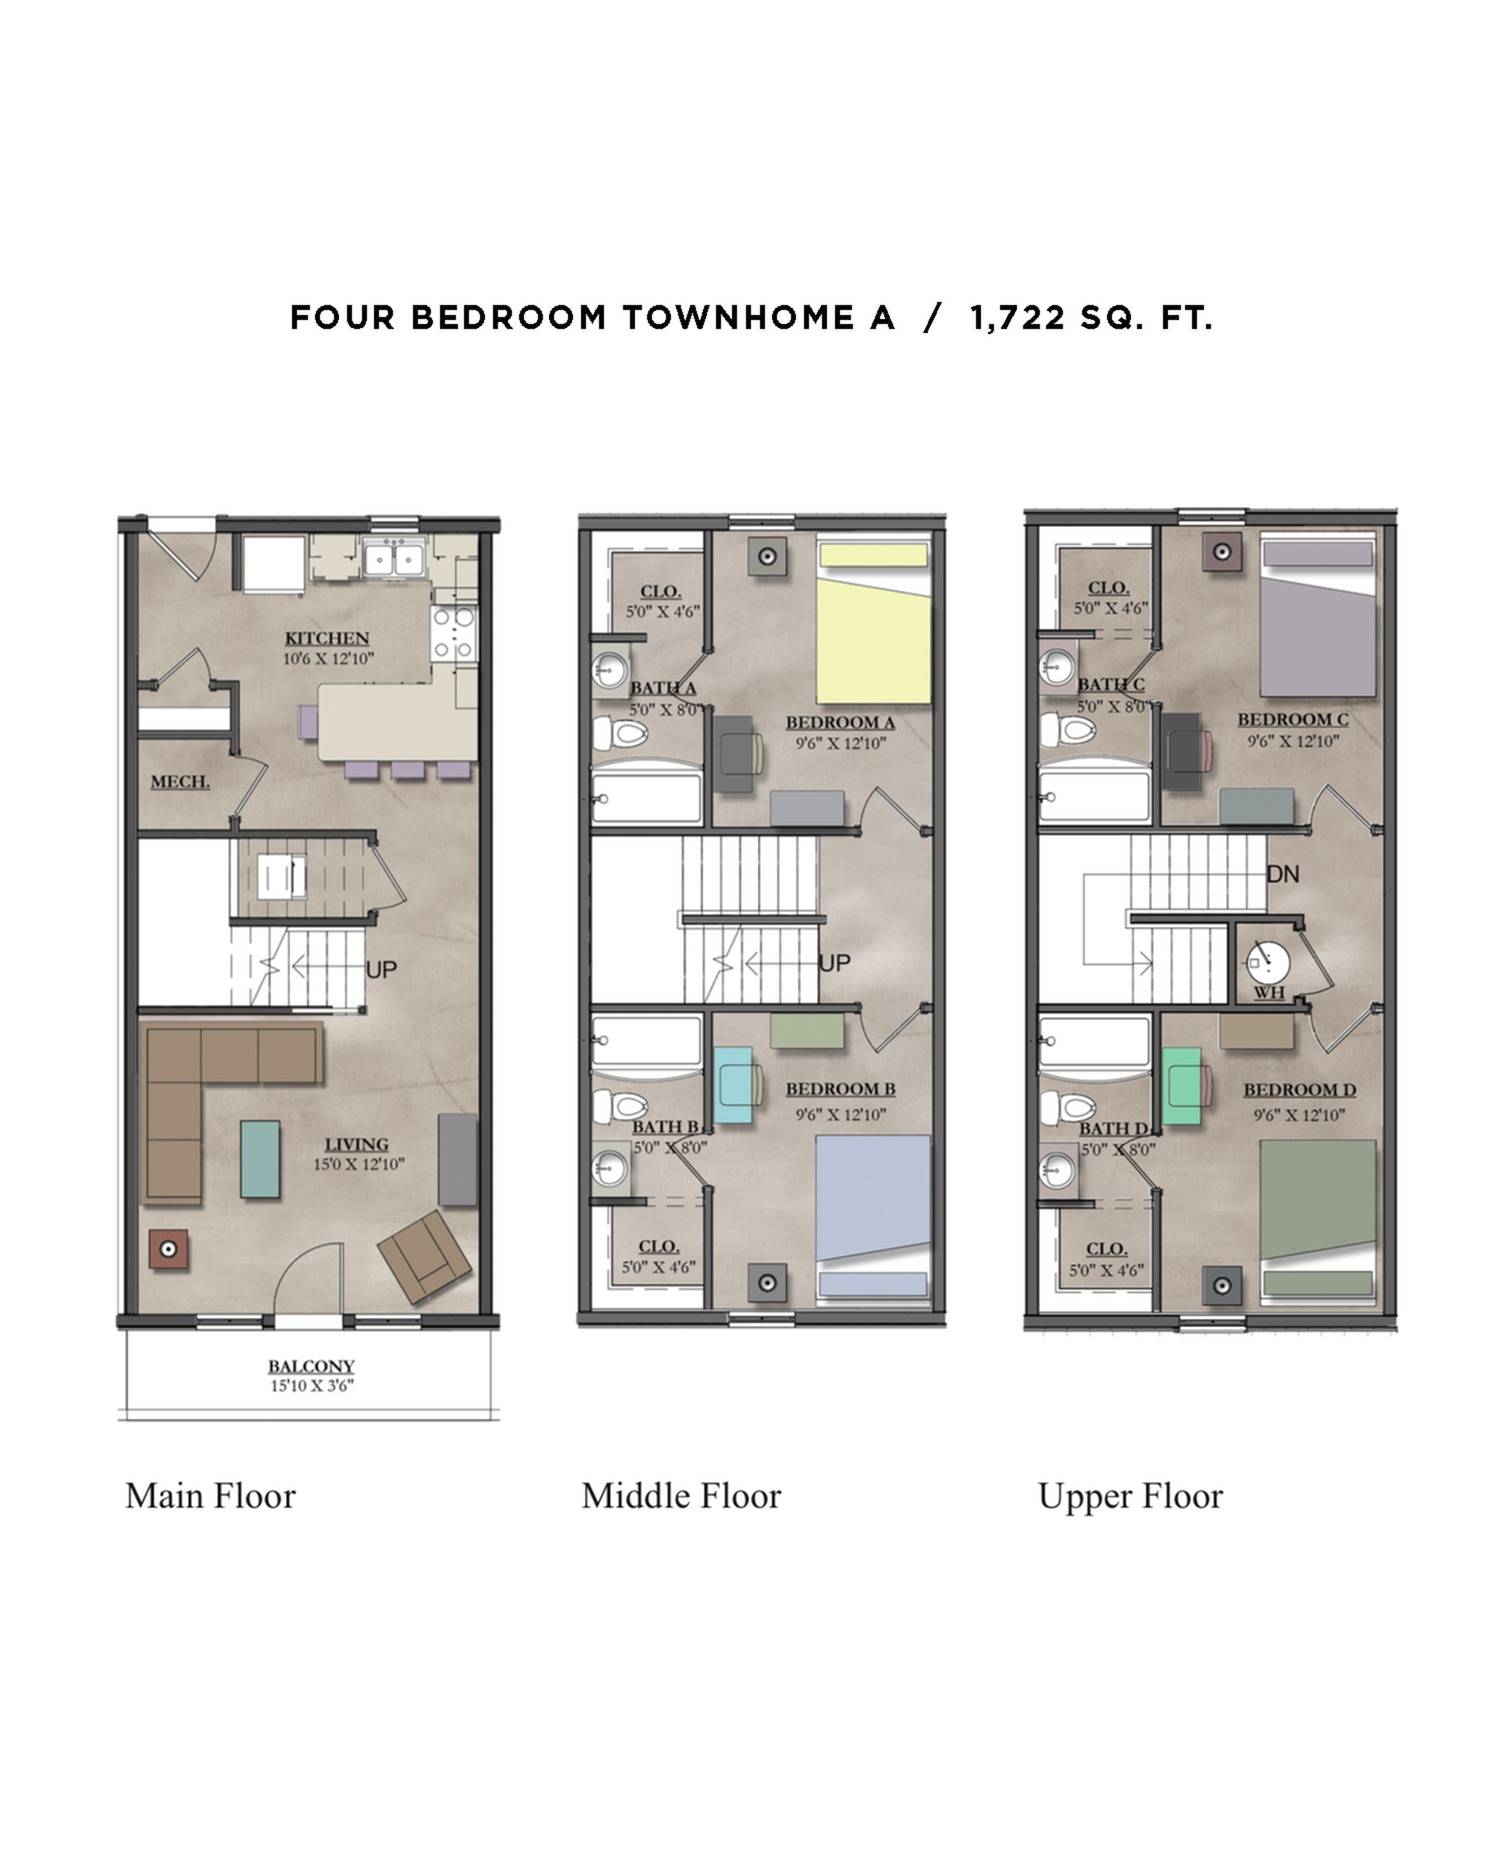 4x4 Townhome A